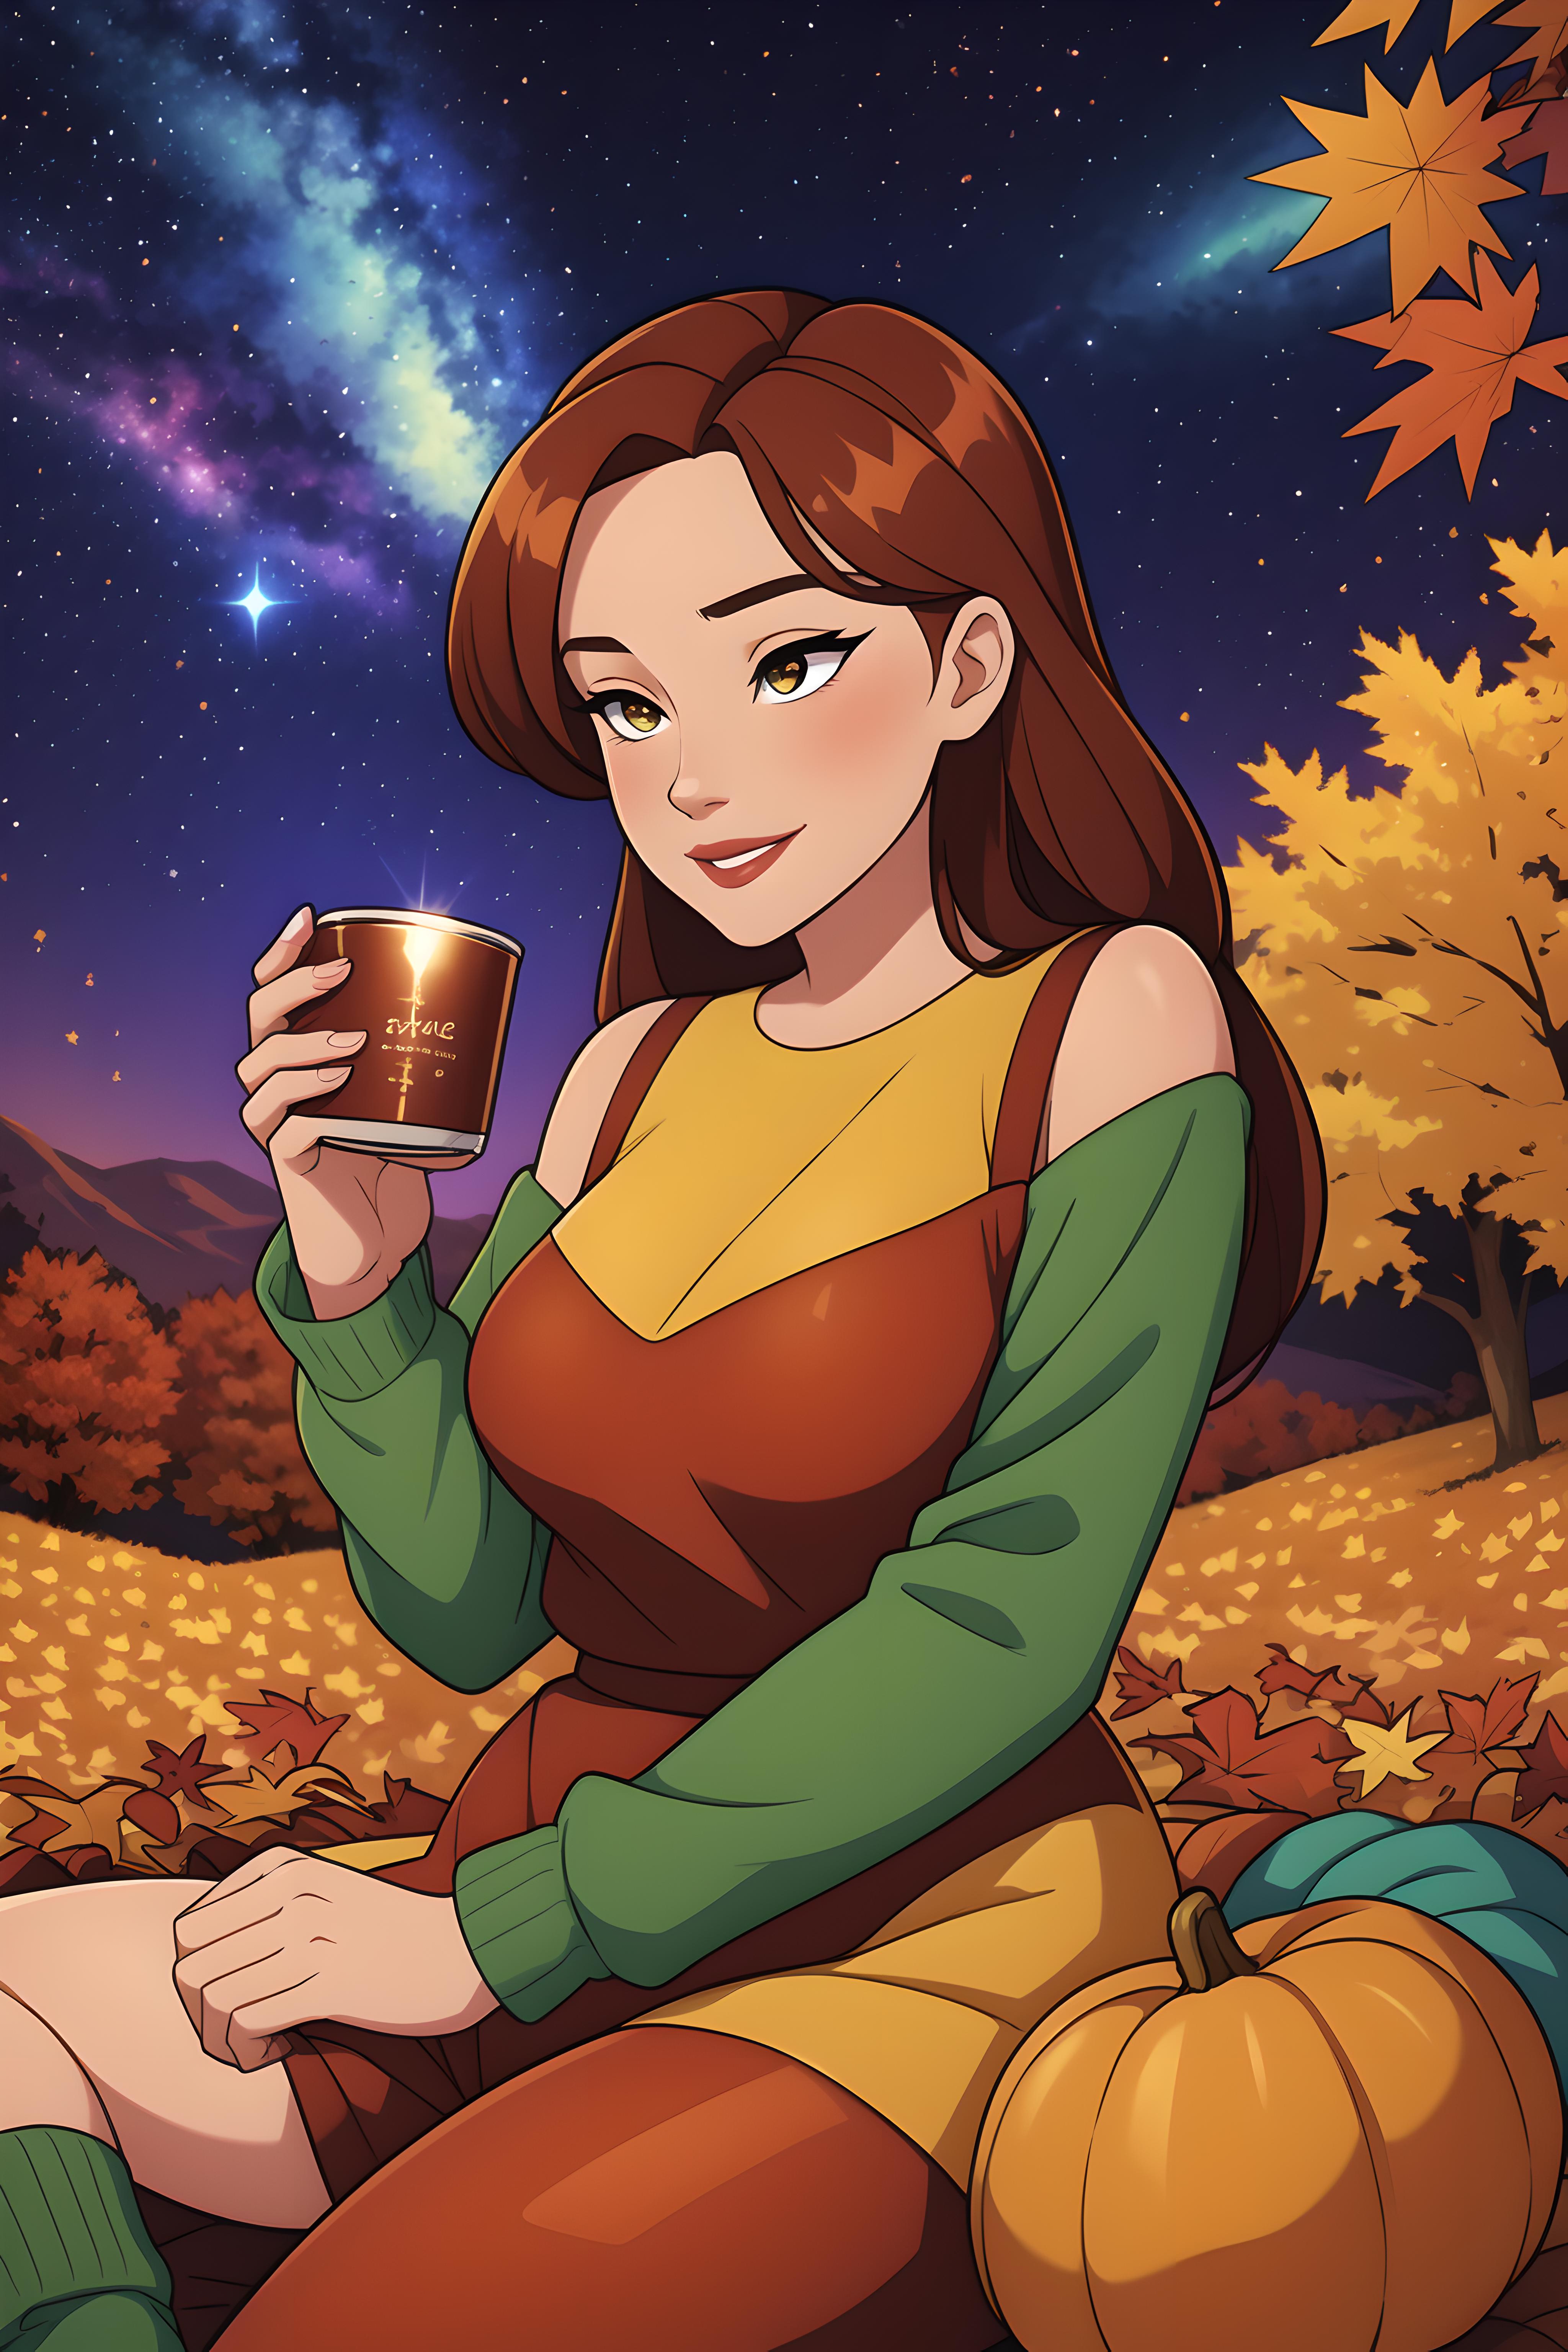 A cartoon woman in a green sweater and red dress drinking from a mug.